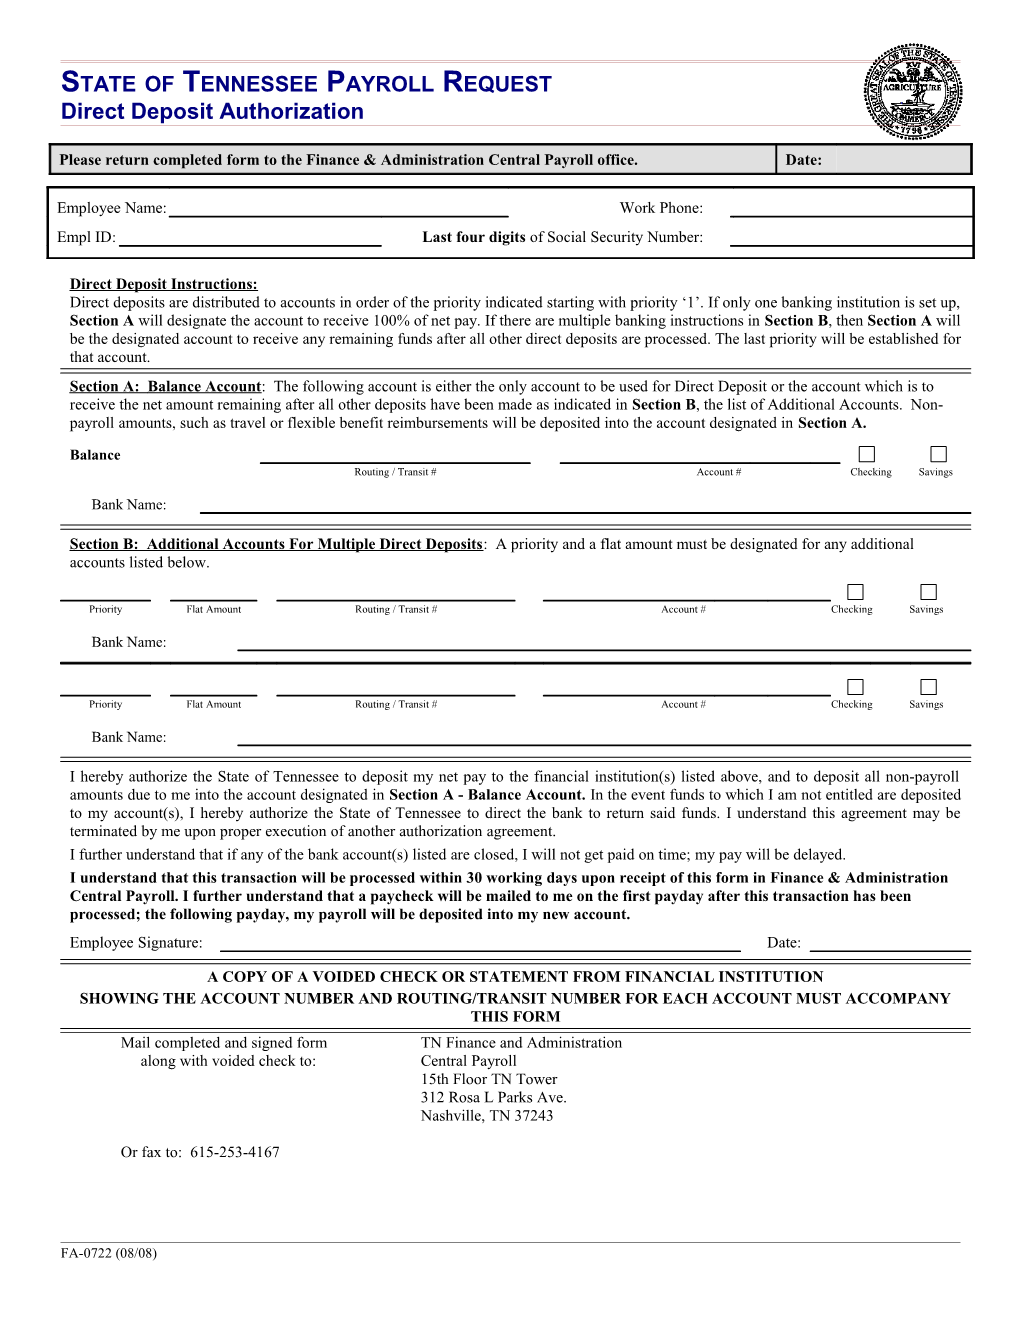 PHRST Payroll Request Form